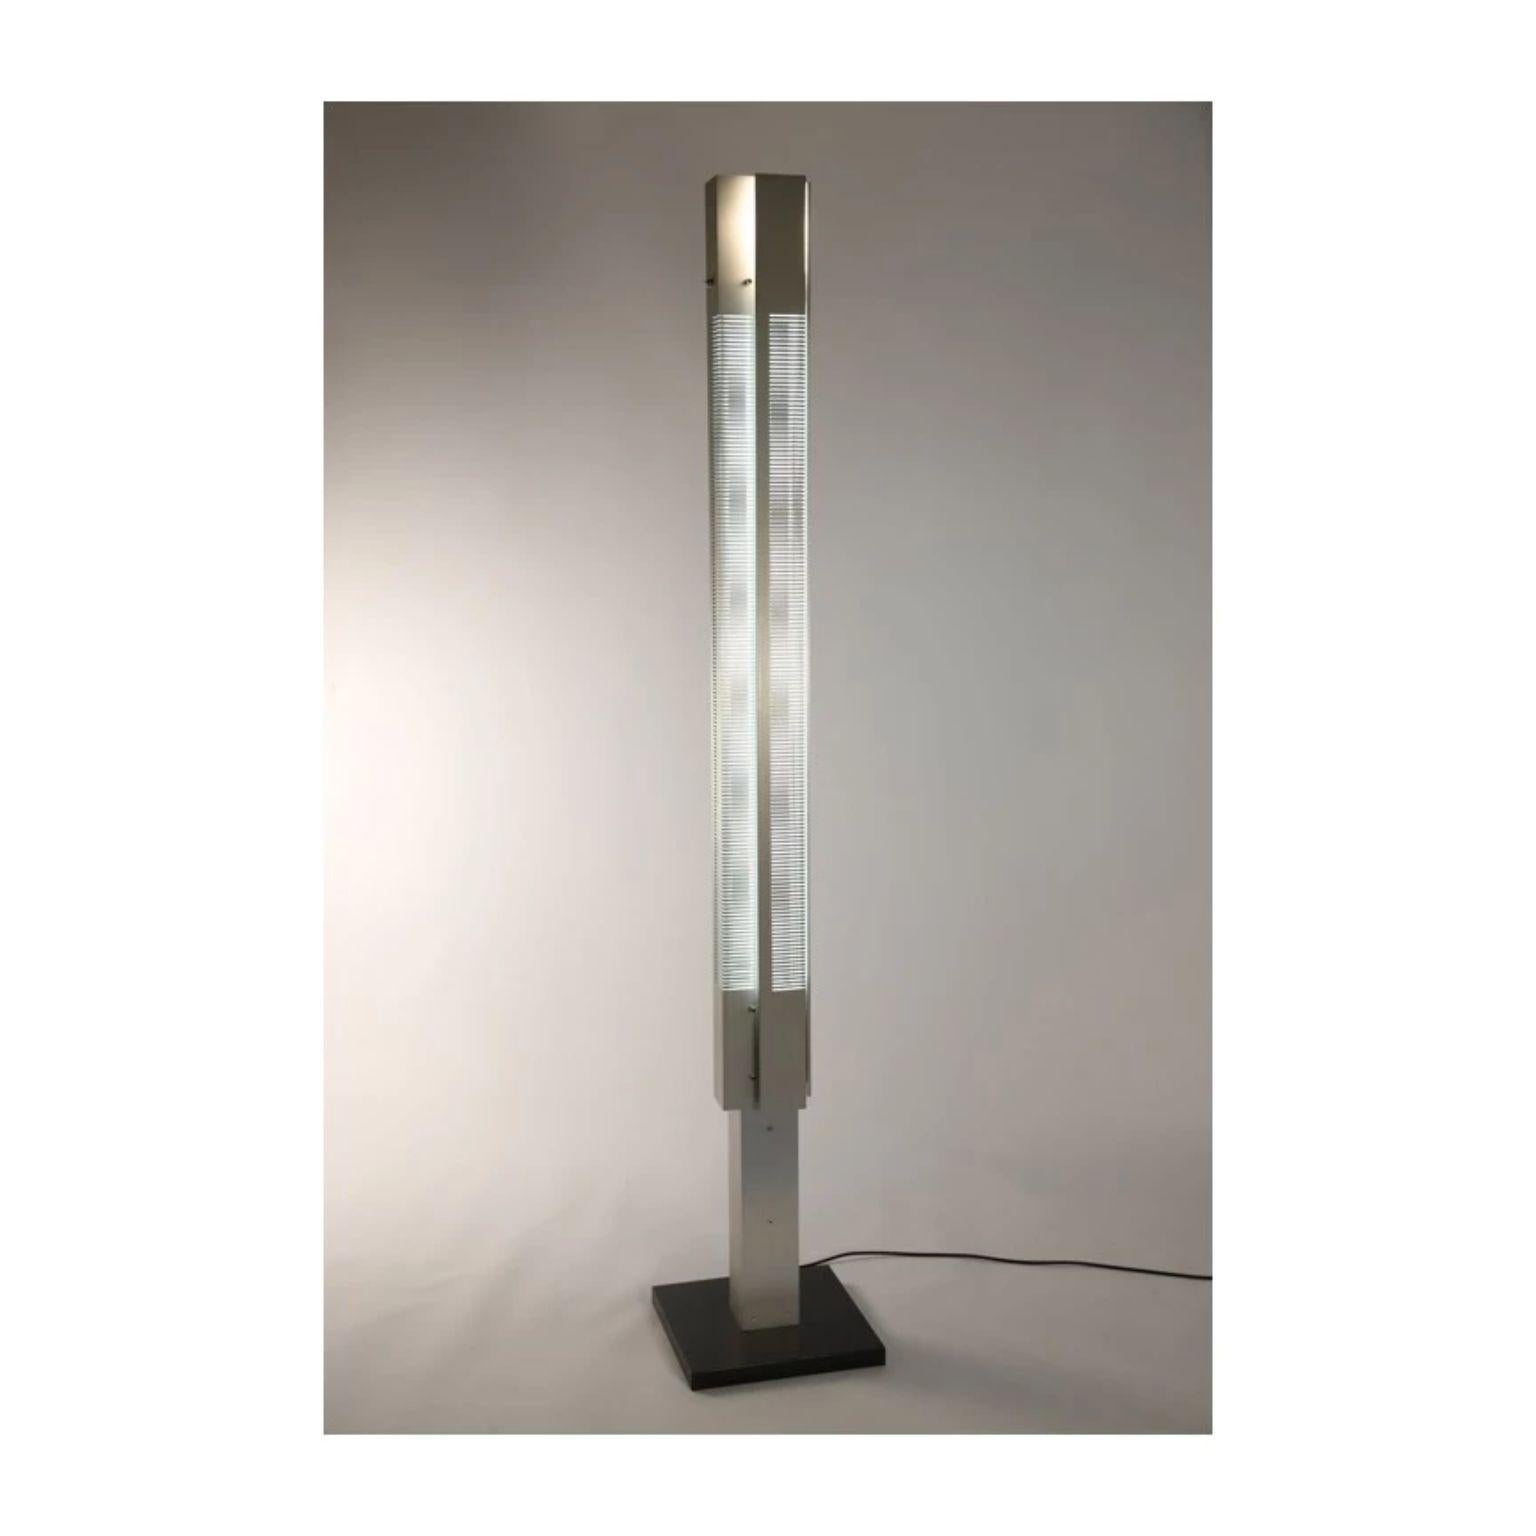 Column lamp signal small by Serge Mouille
Dimensions: D 16 x H 108 cm
Materials: Aluminum
One of a King. Numbered.
Also available in different color and dimensions.

All our lamps can be wired according to each country. If sold to the USA it